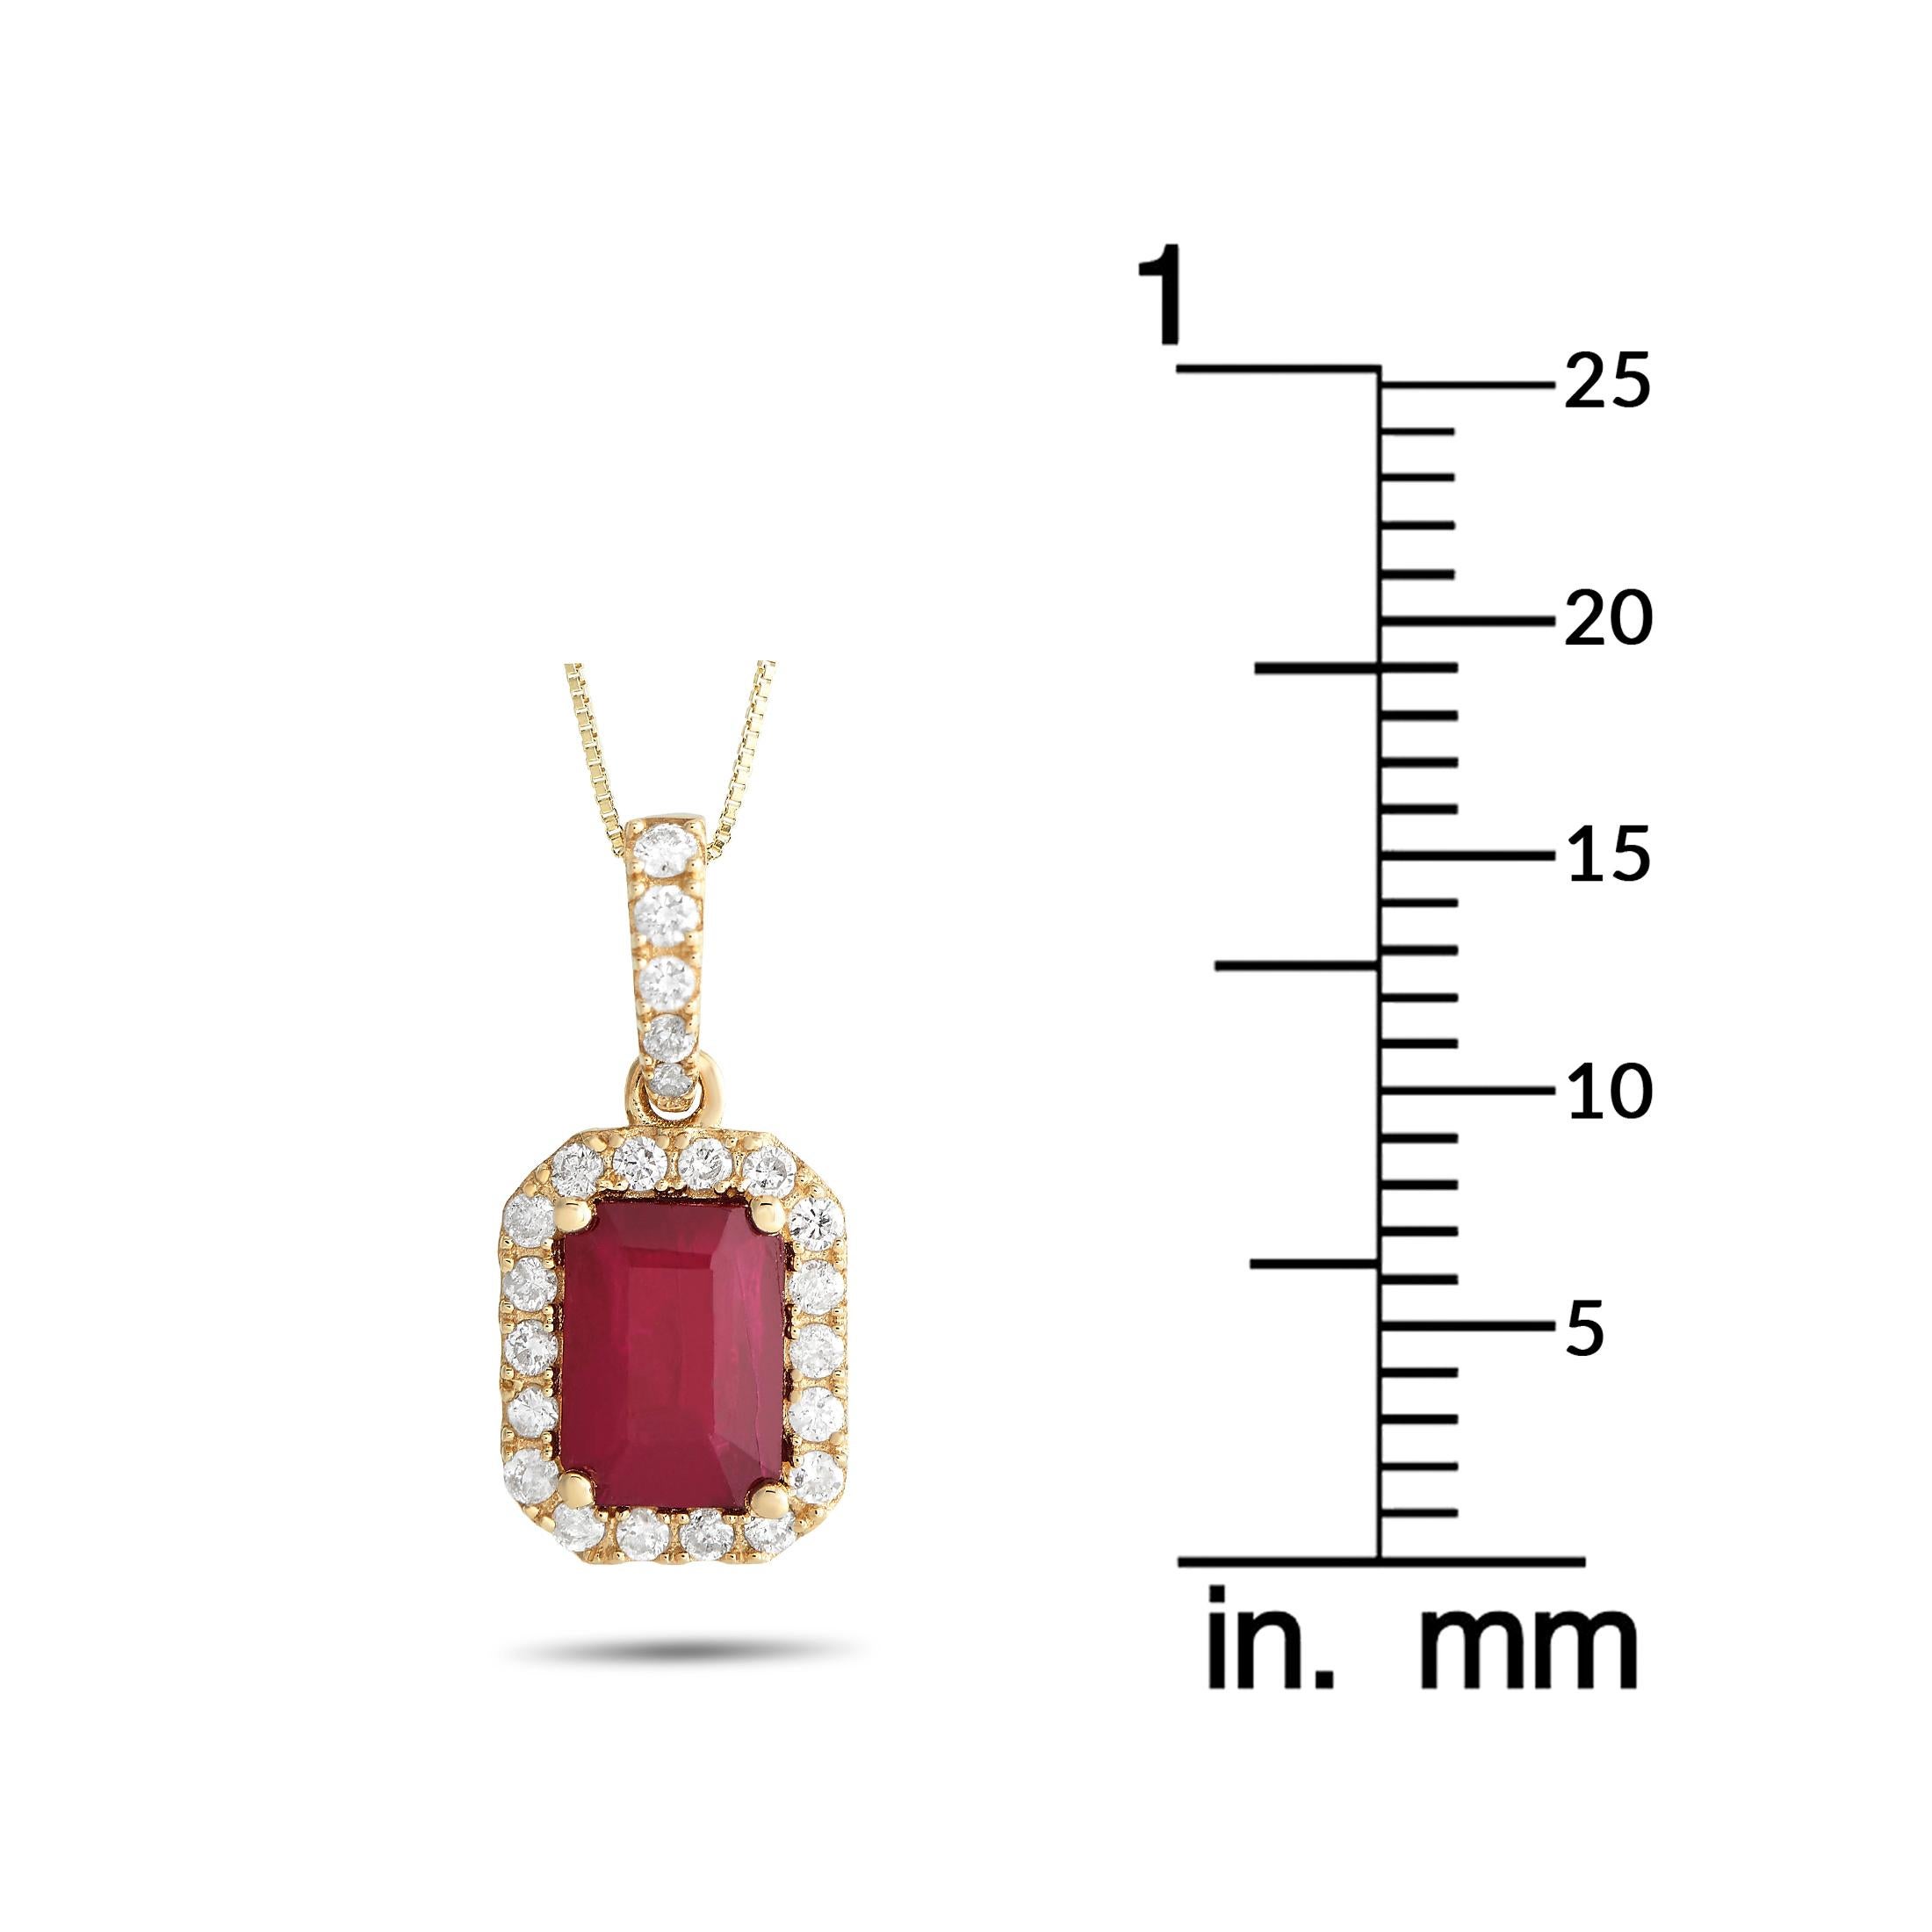 LB Exclusive 14K Yellow Gold 0.20ct Diamond & Ruby Pendant Necklace PD4-15910YRU In New Condition For Sale In Southampton, PA